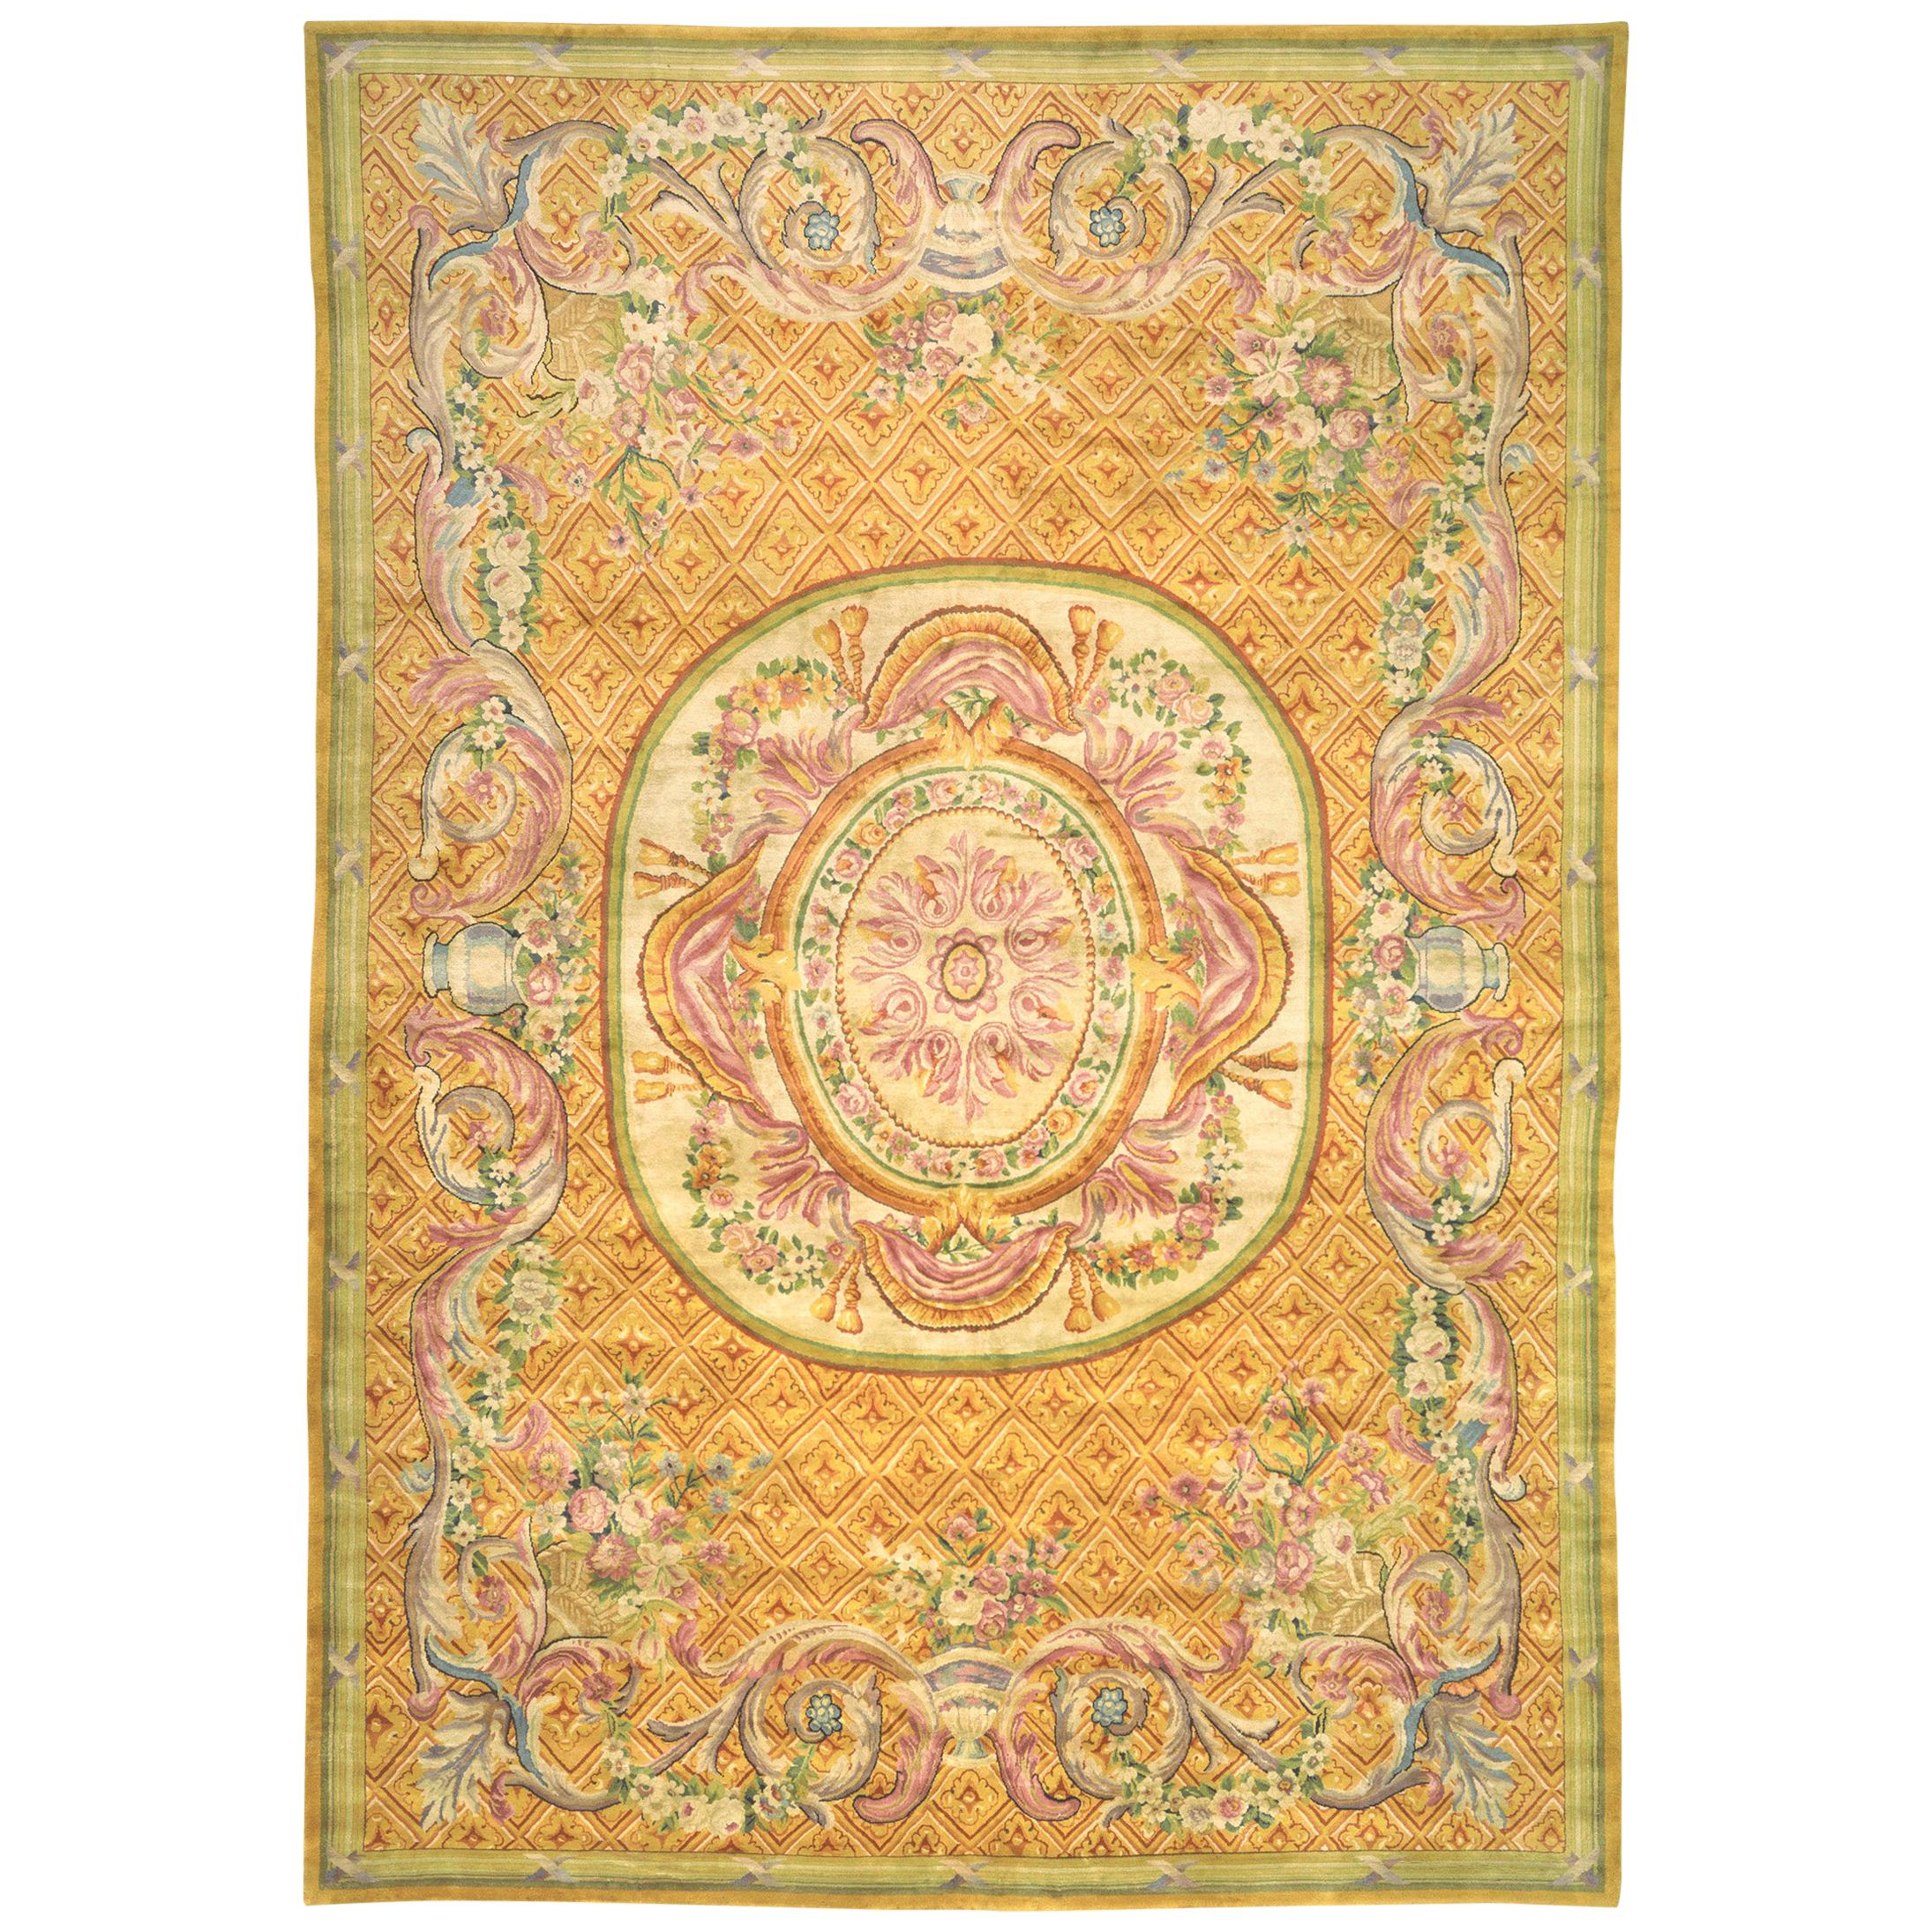 Antique French Savonnerie Rug